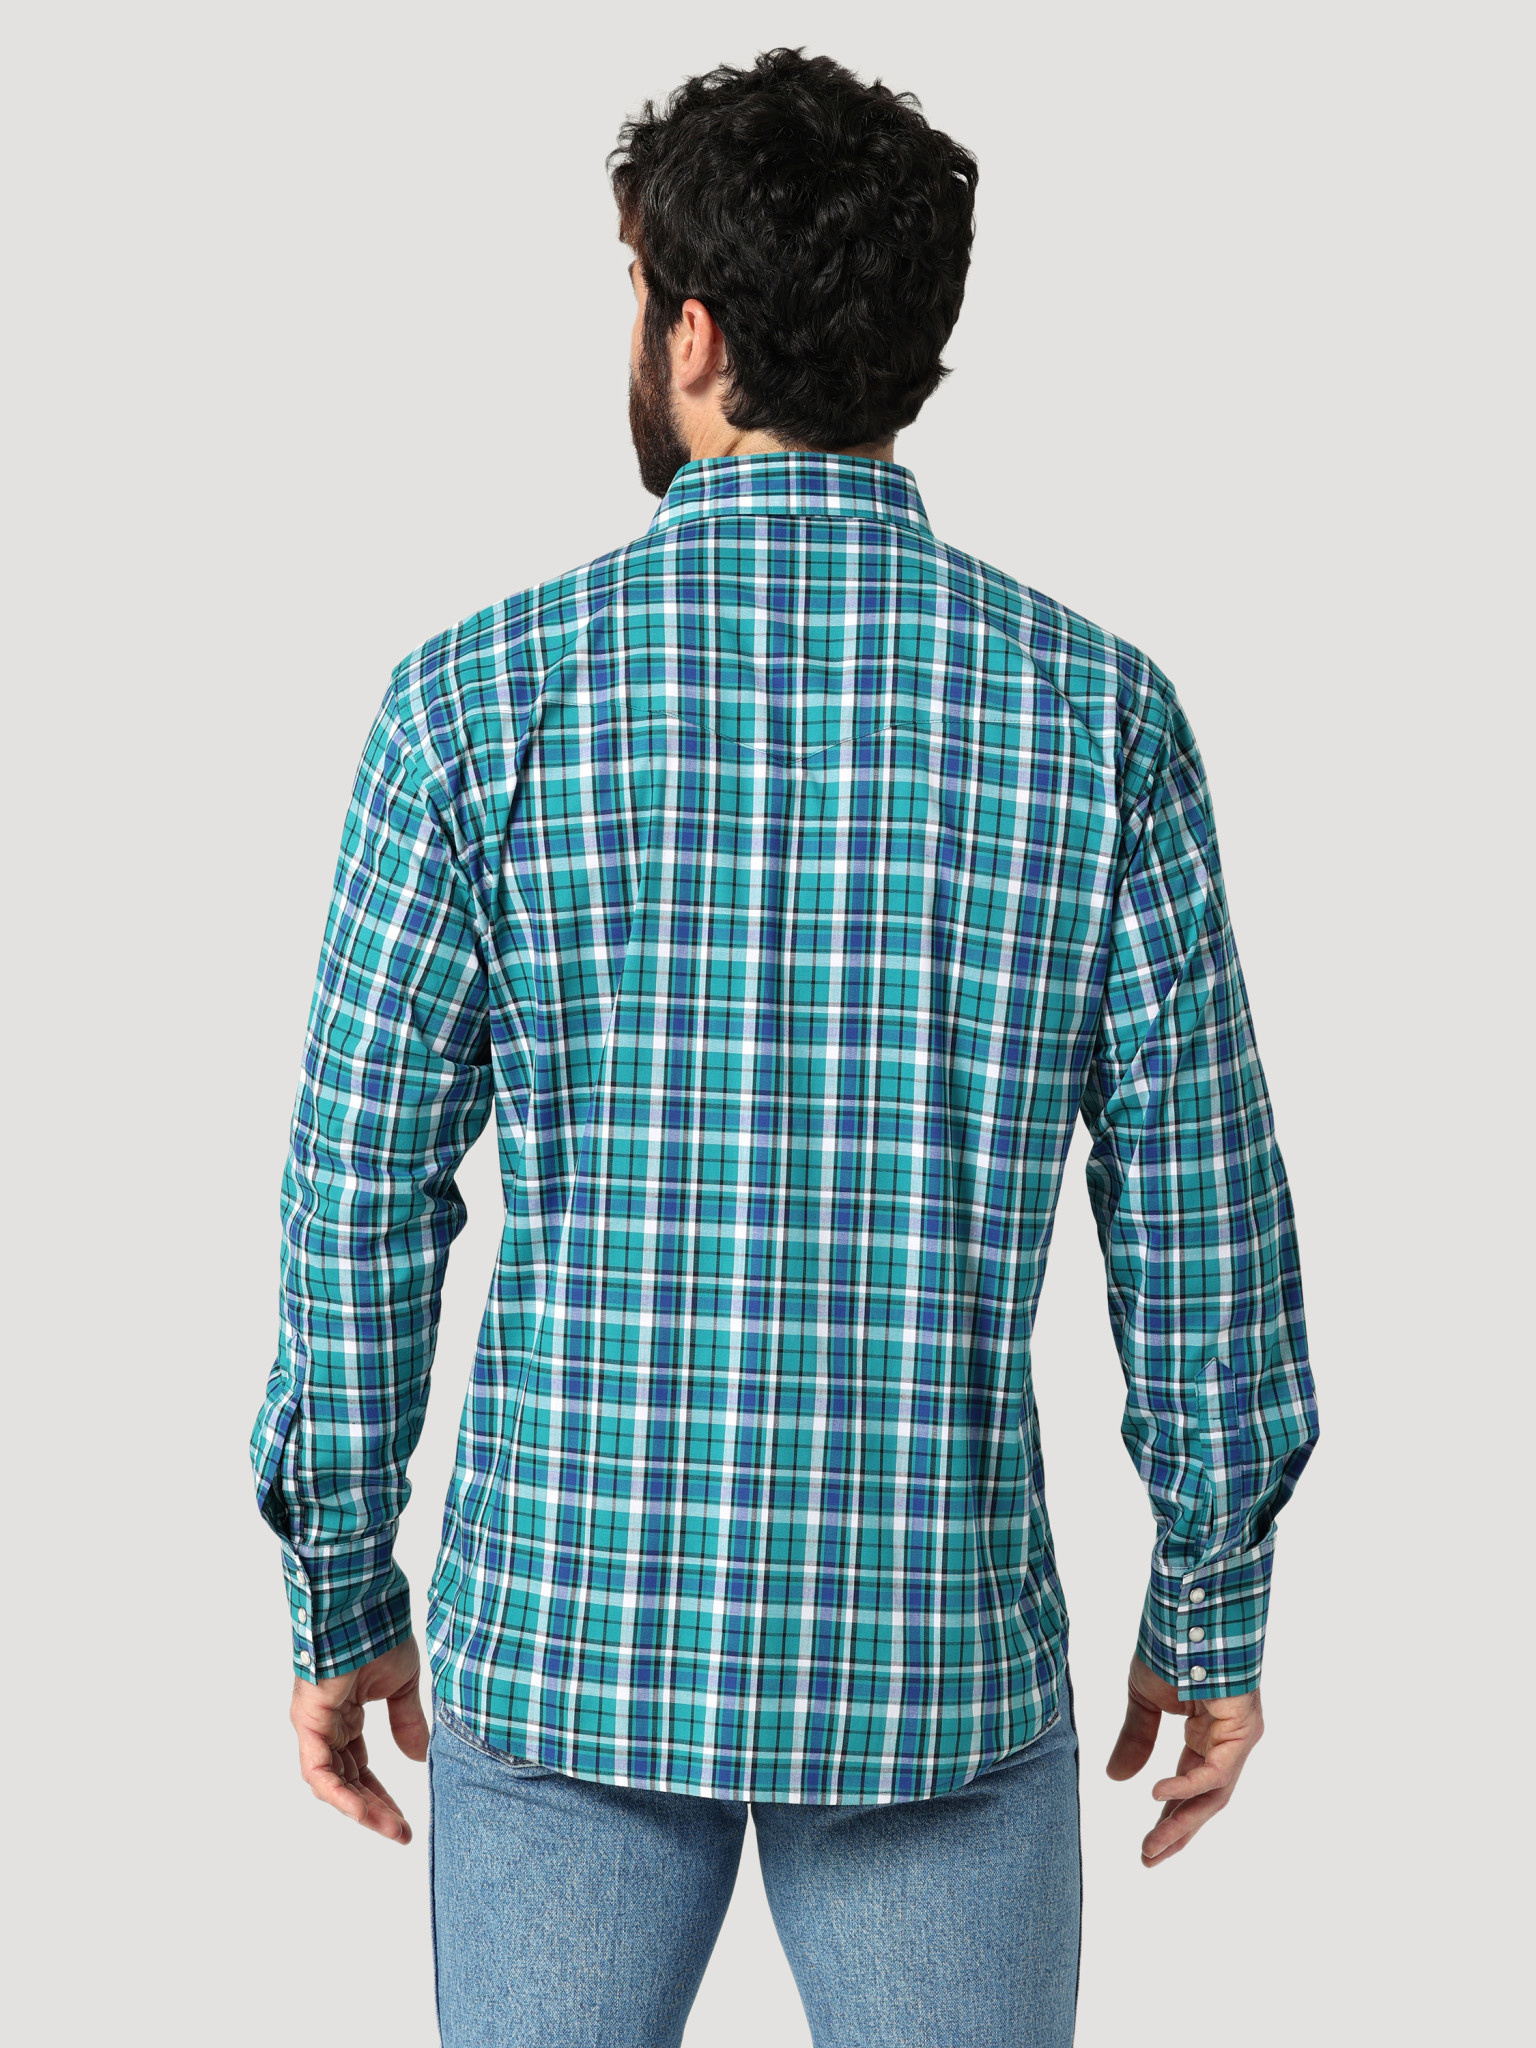 Wrangler Wrinkle Resist Relaxed Fit Shirt Teal - Frontier Western Shop